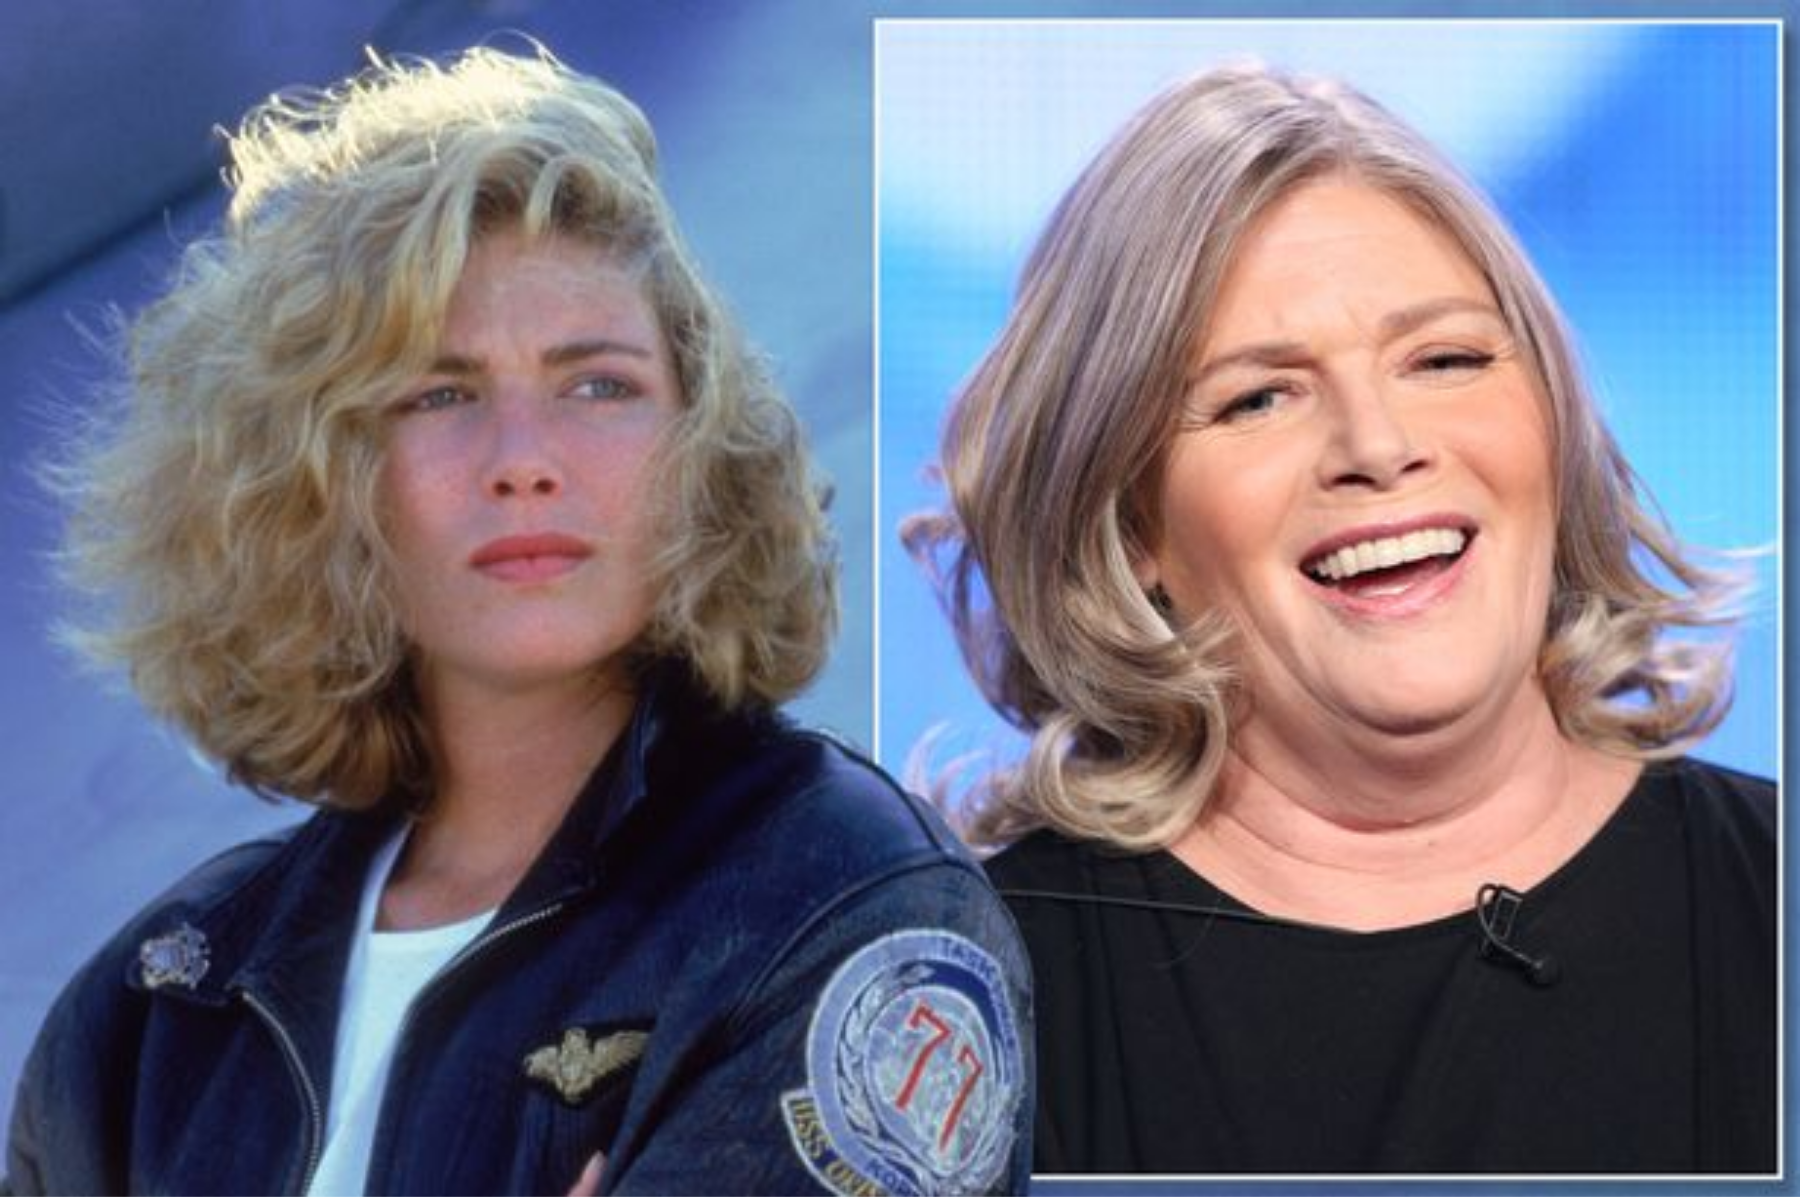 Kelly Mcginnis - Will She Reappear In A 'Top Gun' Remake?